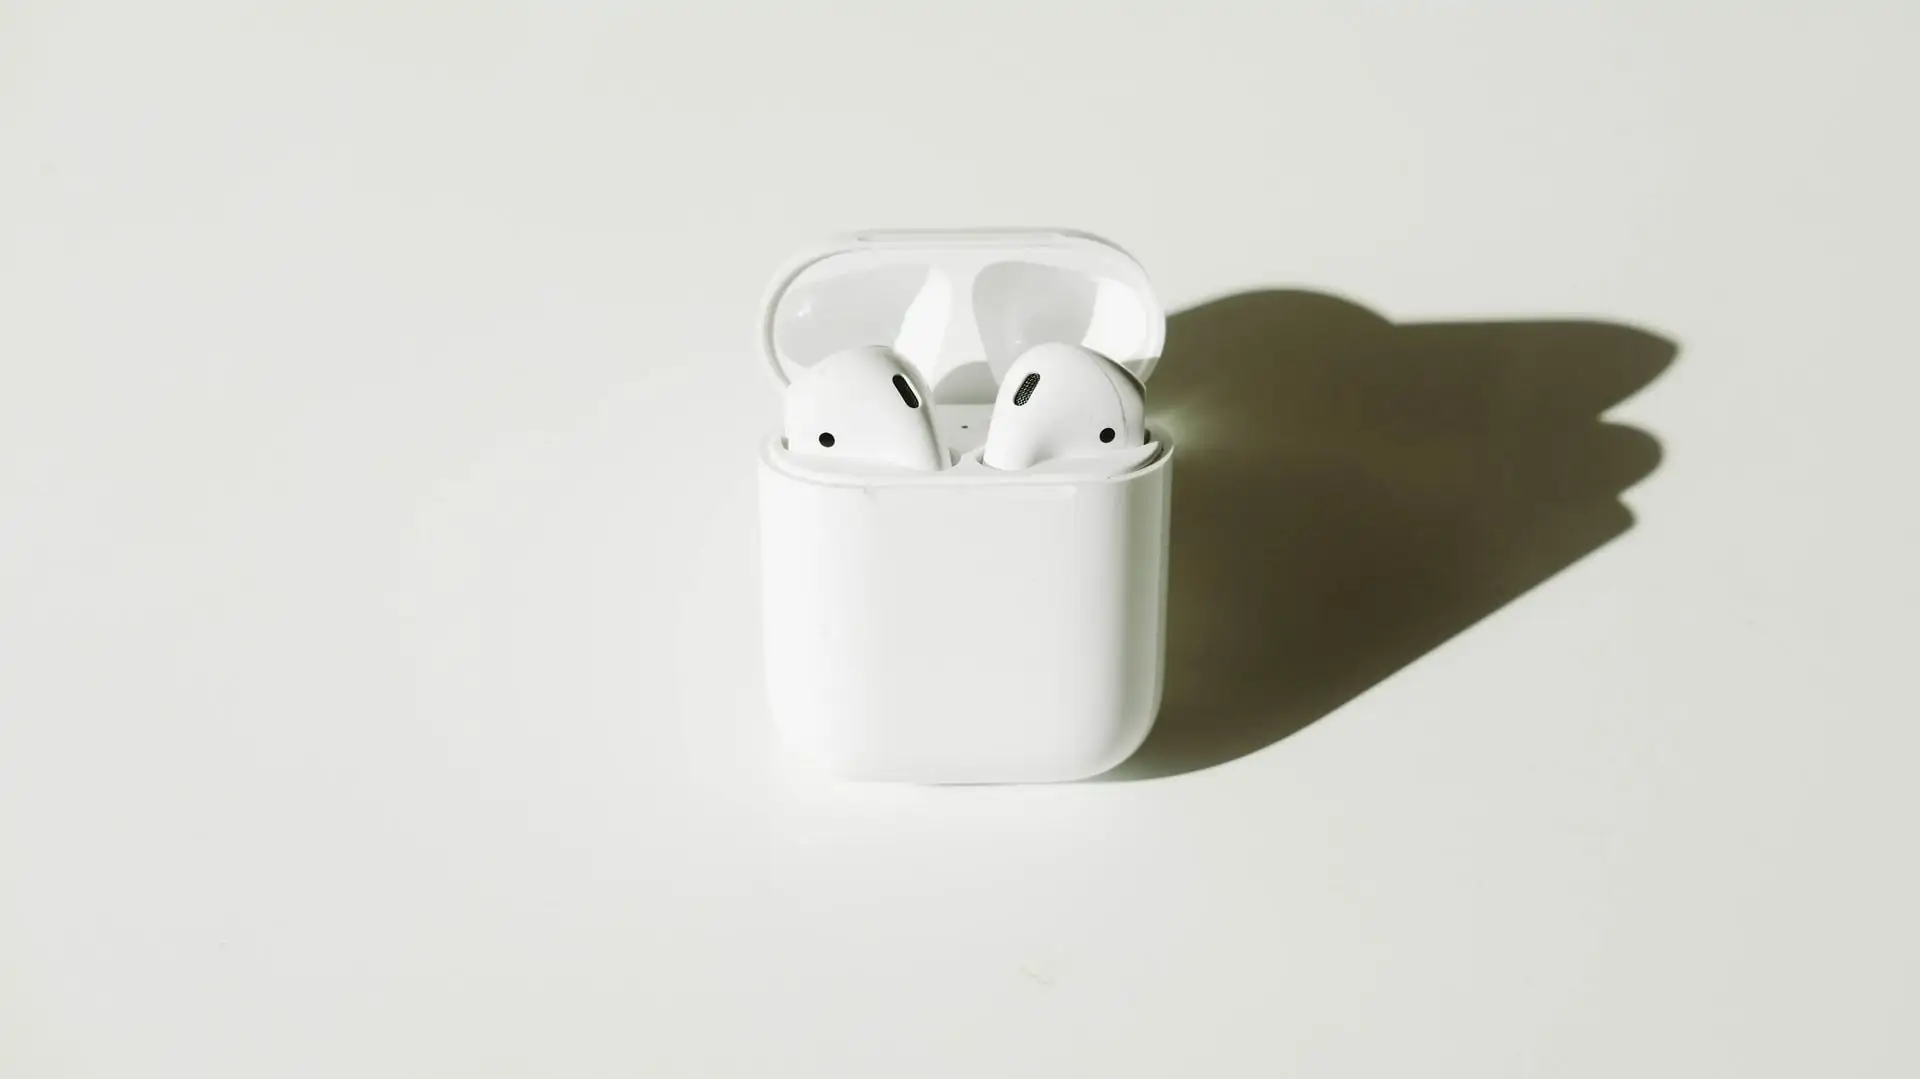 Airpods op witte achtergrond